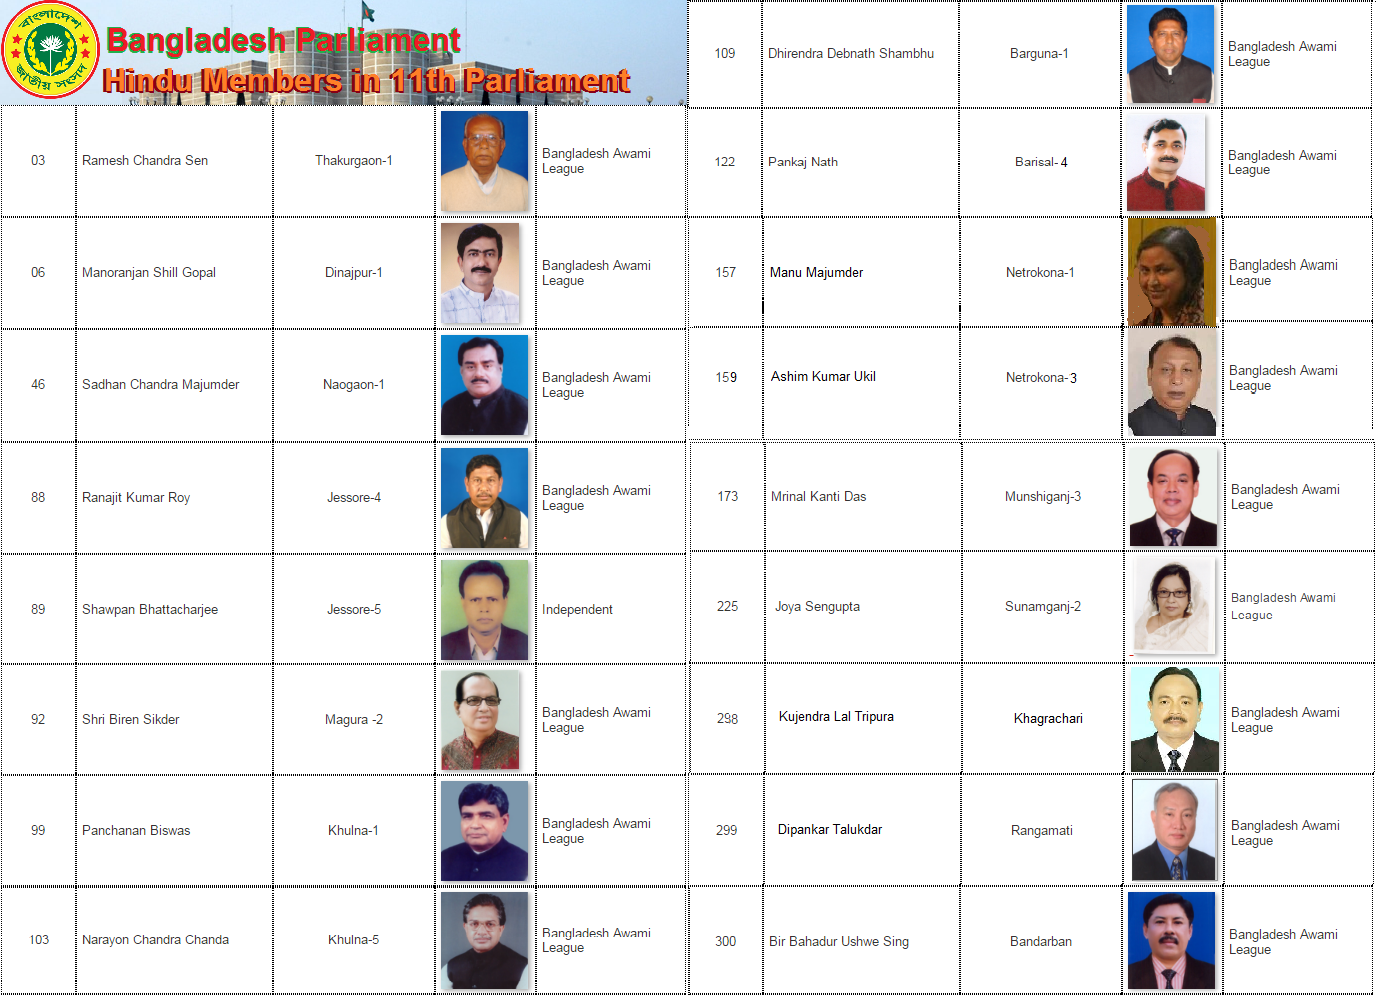 Seventeen Hindu members have been elected in 11th Parliament in Bangladesh. | Struggle ...1376 x 996